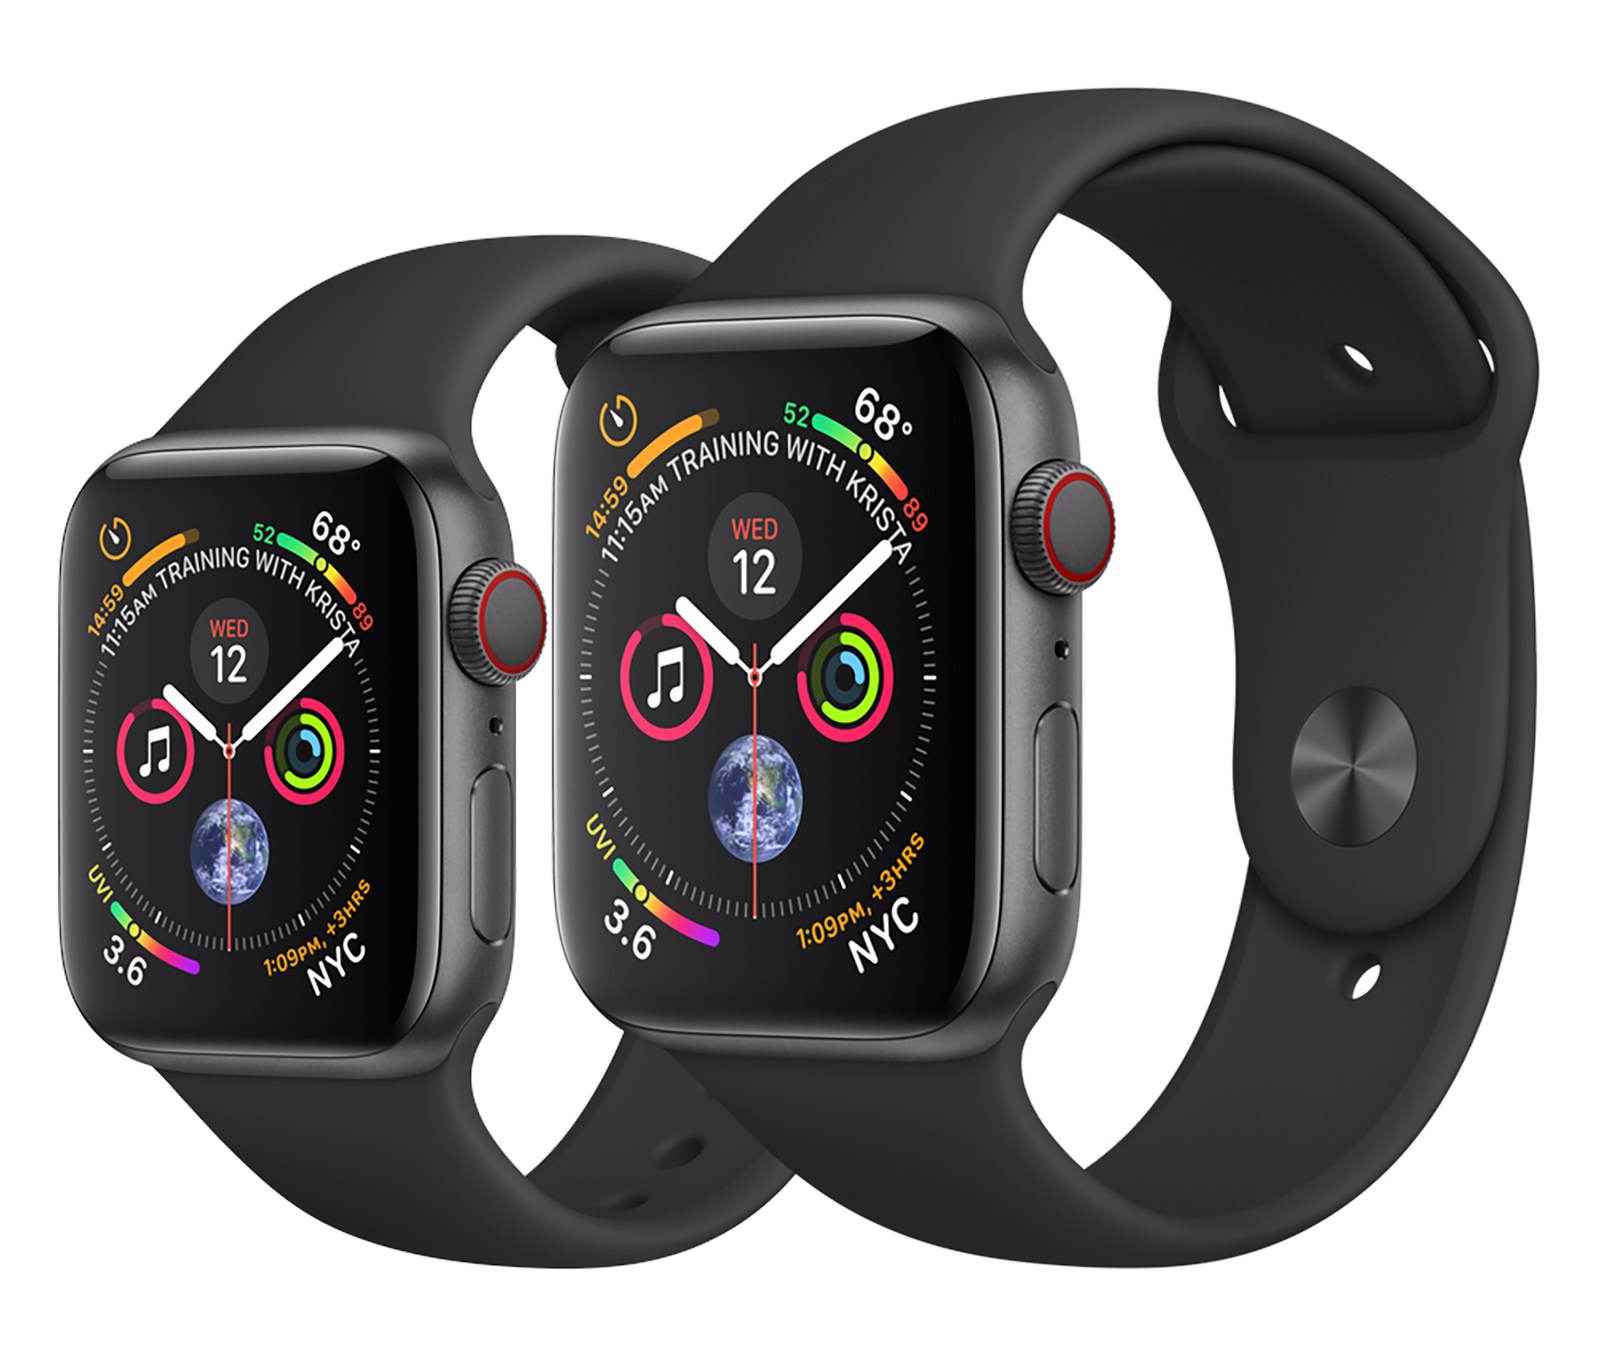 Apple Watch Series 4 (GPS + Cellular) - MTUX2LL/A (44mm (Space Gray